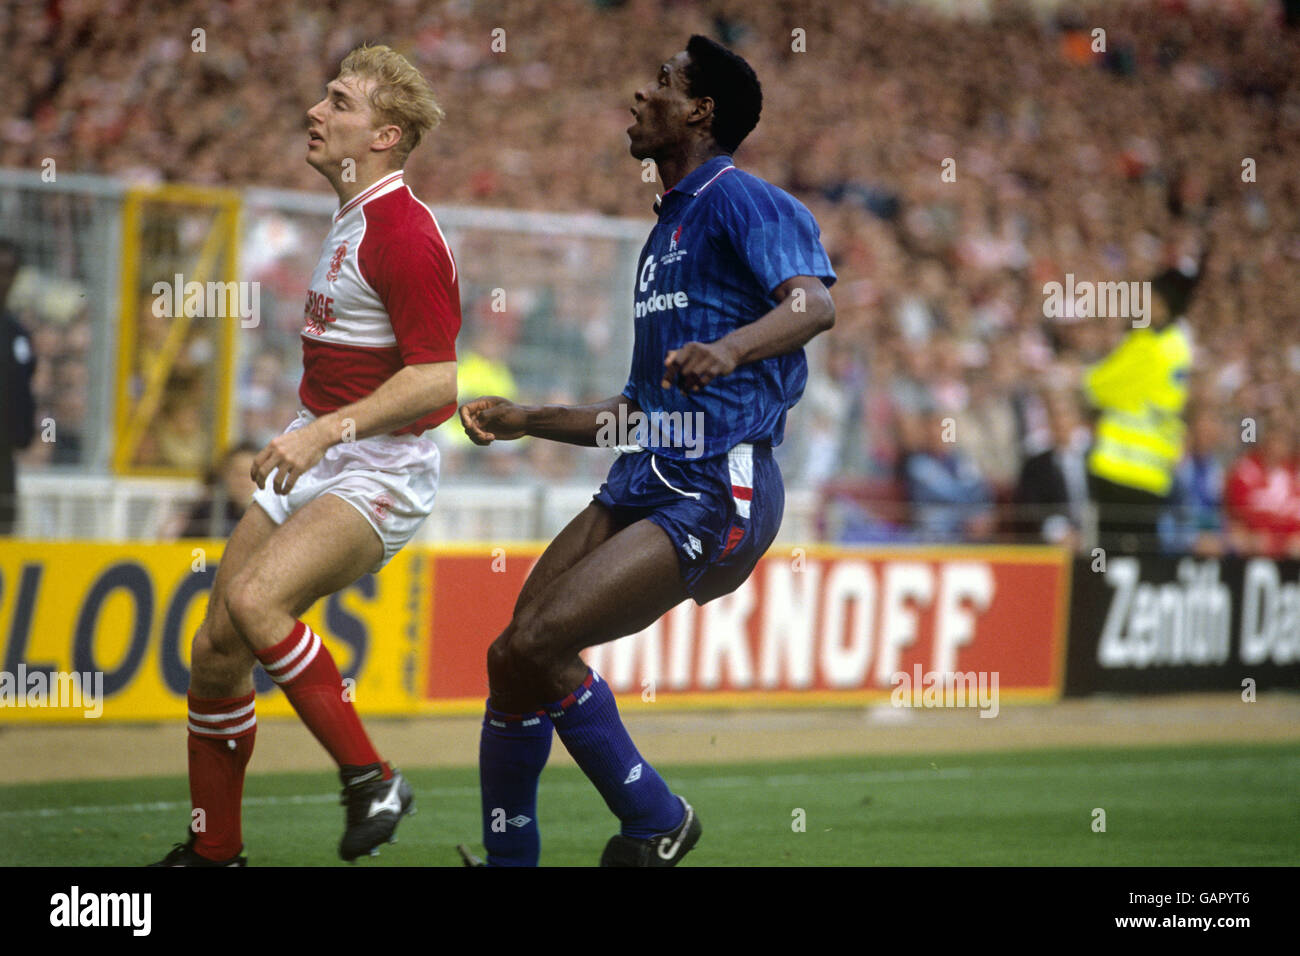 Calcio - Zenith Data Systems Cup Final - Chelsea v Middlesbrough - Wembley Stadium Foto Stock